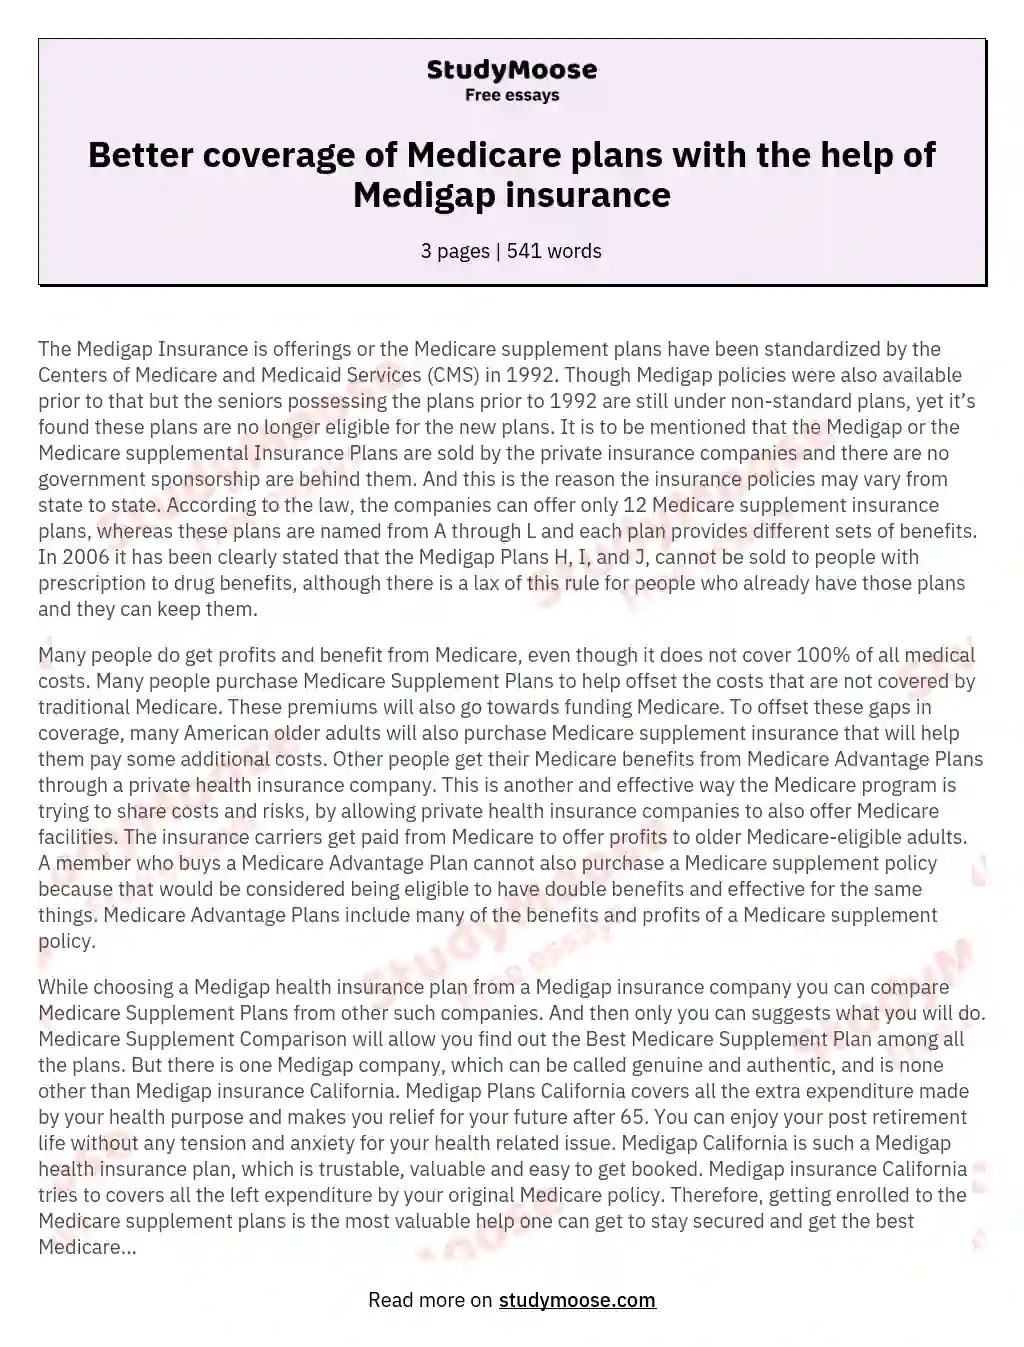 Better coverage of Medicare plans with the help of Medigap insurance essay